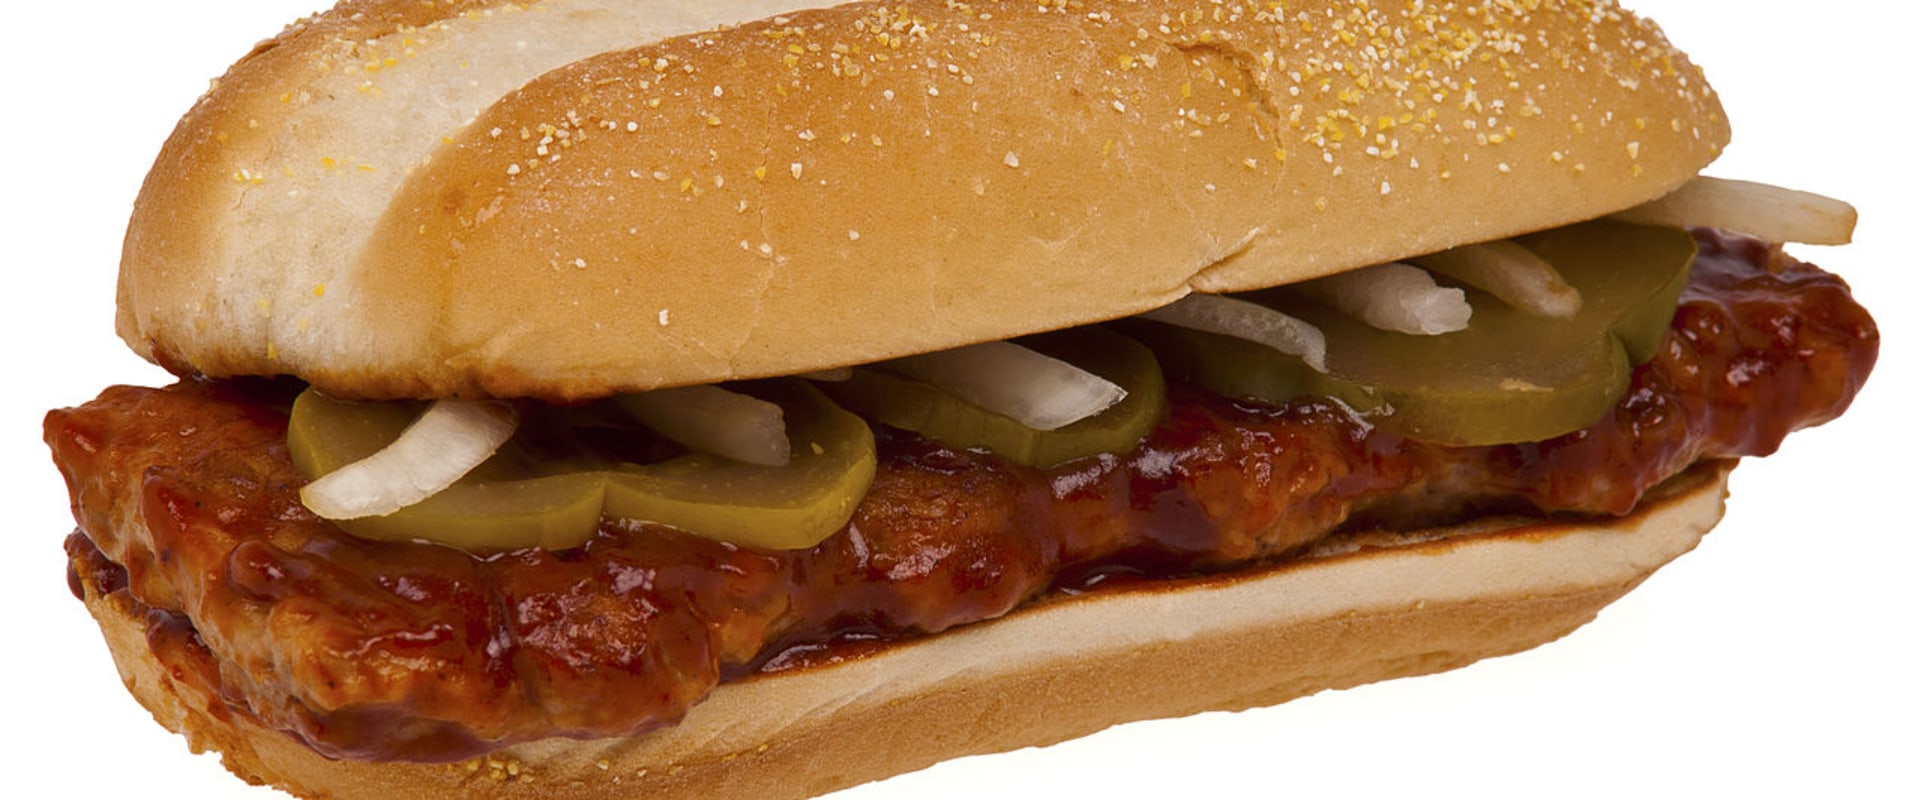 The McRib Phenomenon Why Does McDonald's Come and Go with the Popular